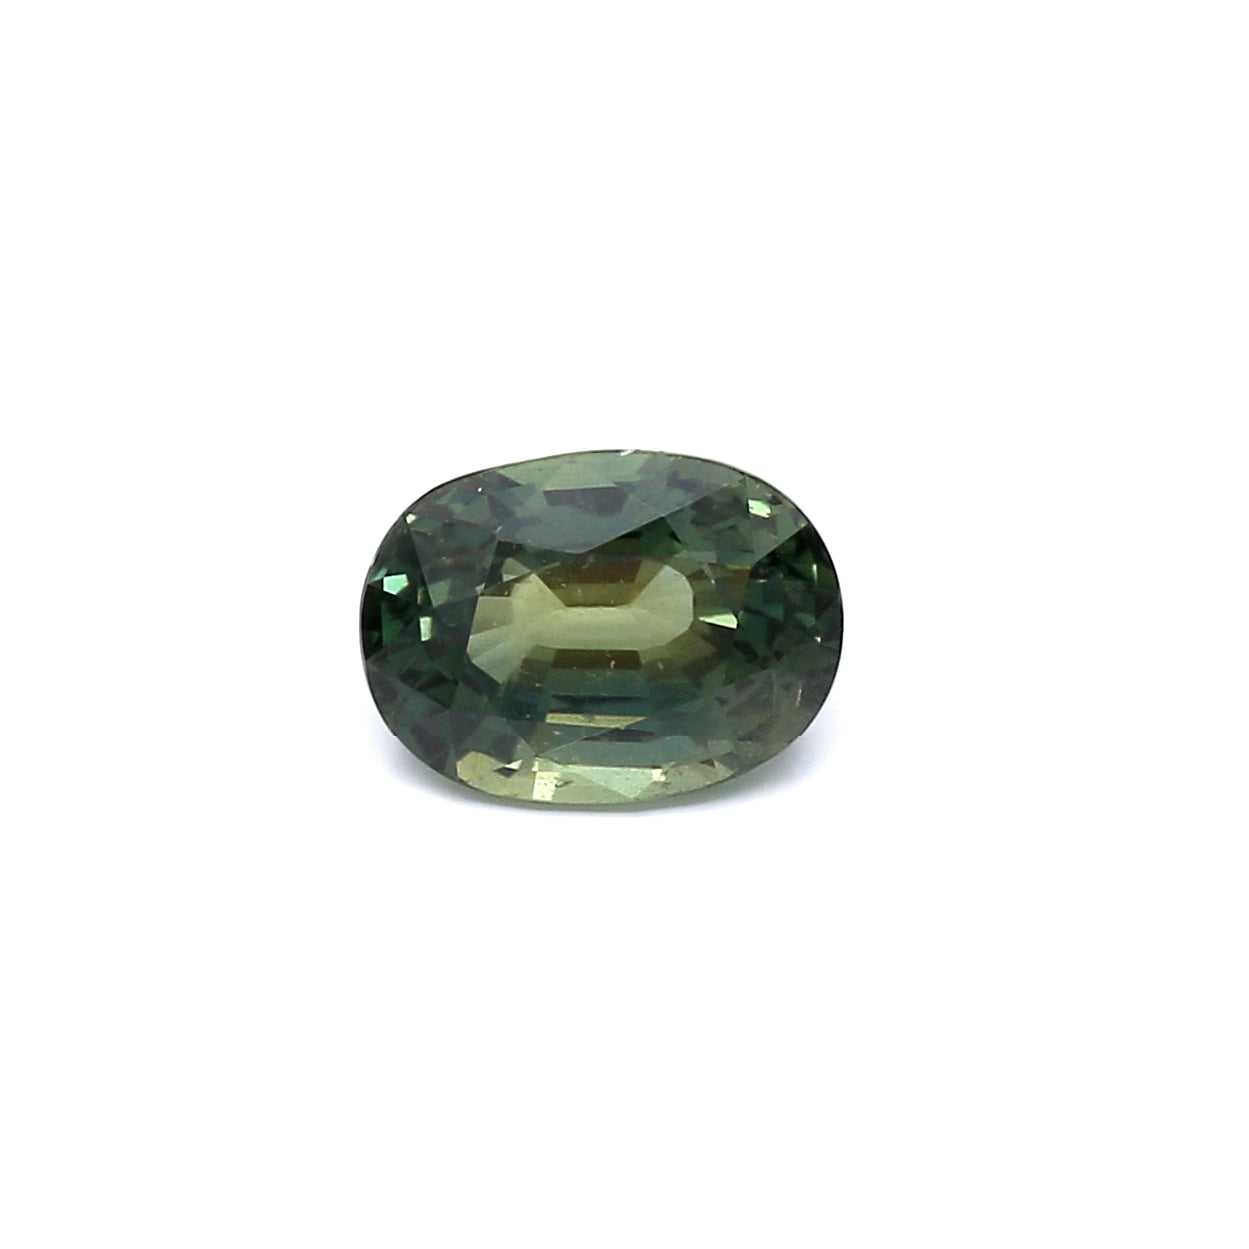 2.25ct Green, Oval Sapphire, Heated, East Africa - 8.40 x 6.30 x 4.65mm